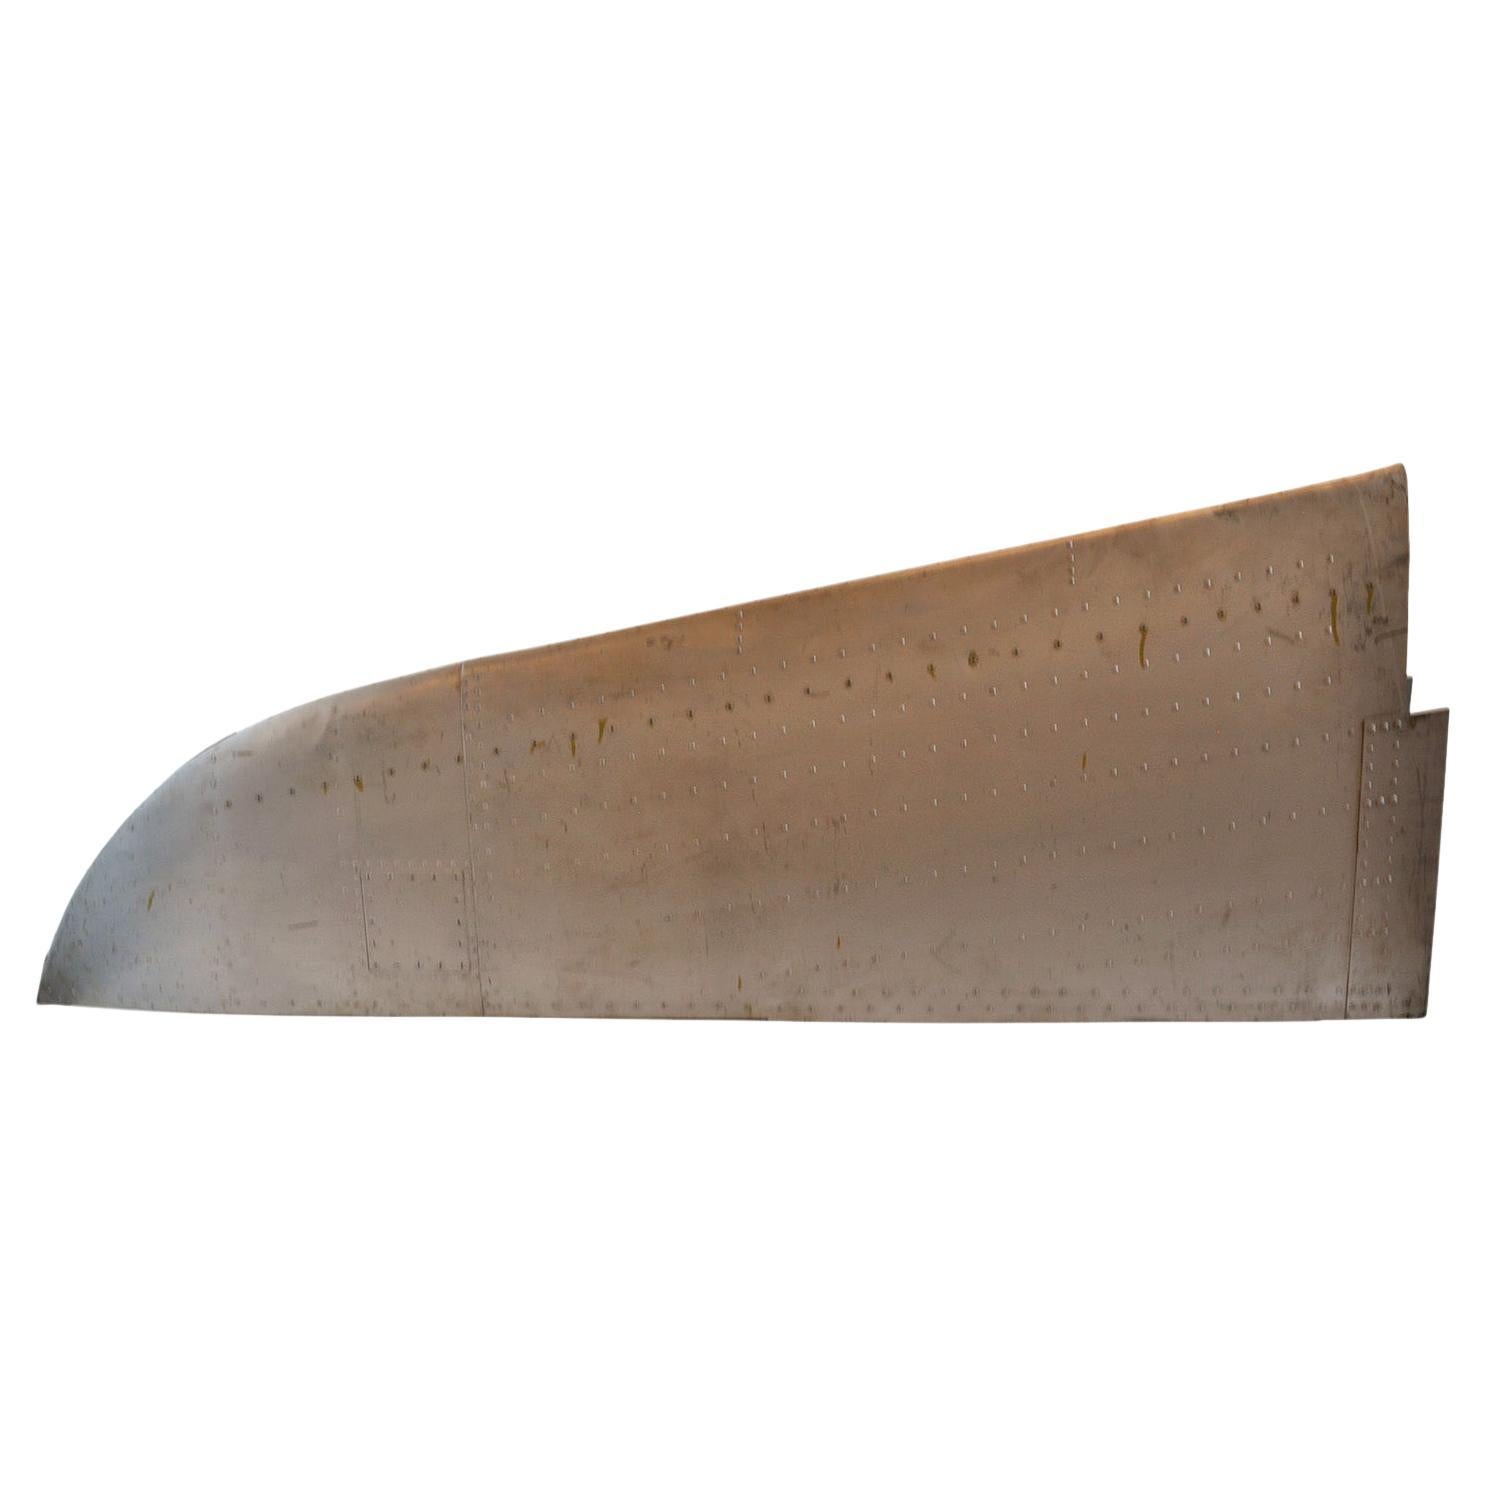 WWII PB4Y Patrol Bomber Tail Tip For Sale